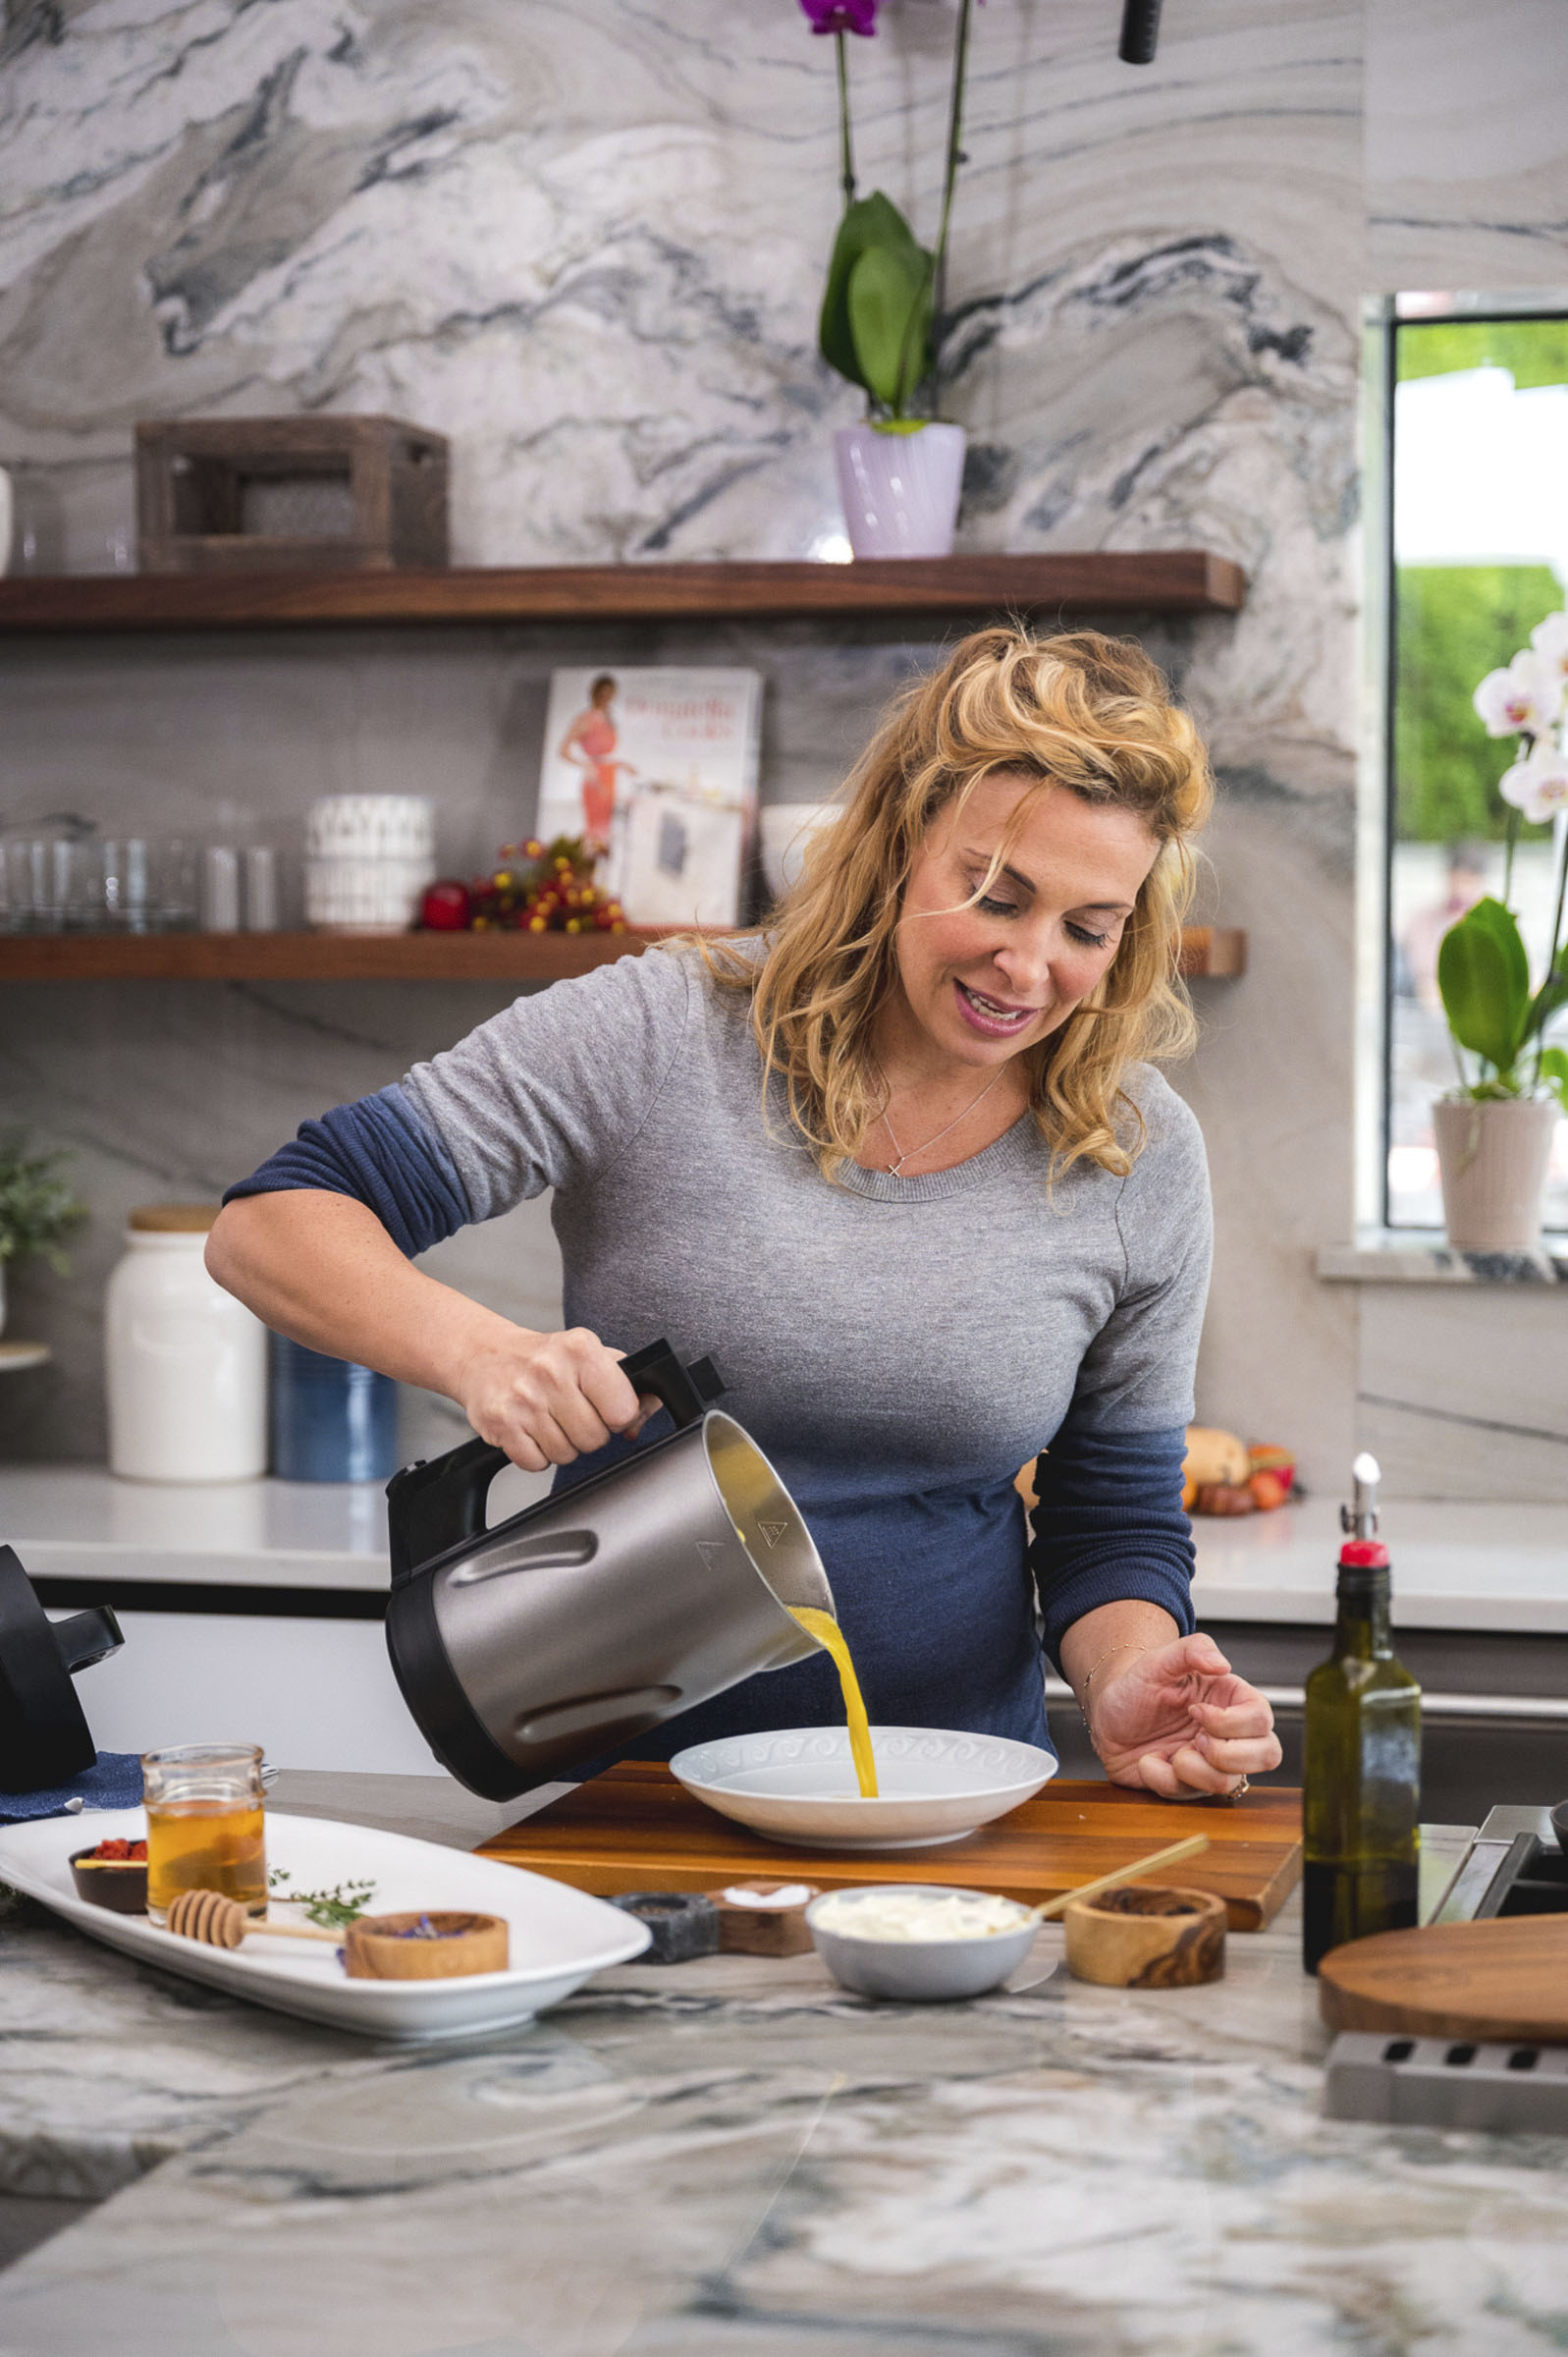 Philips Soup Maker – Enjoy Healthy & Perfectly Textured Soups